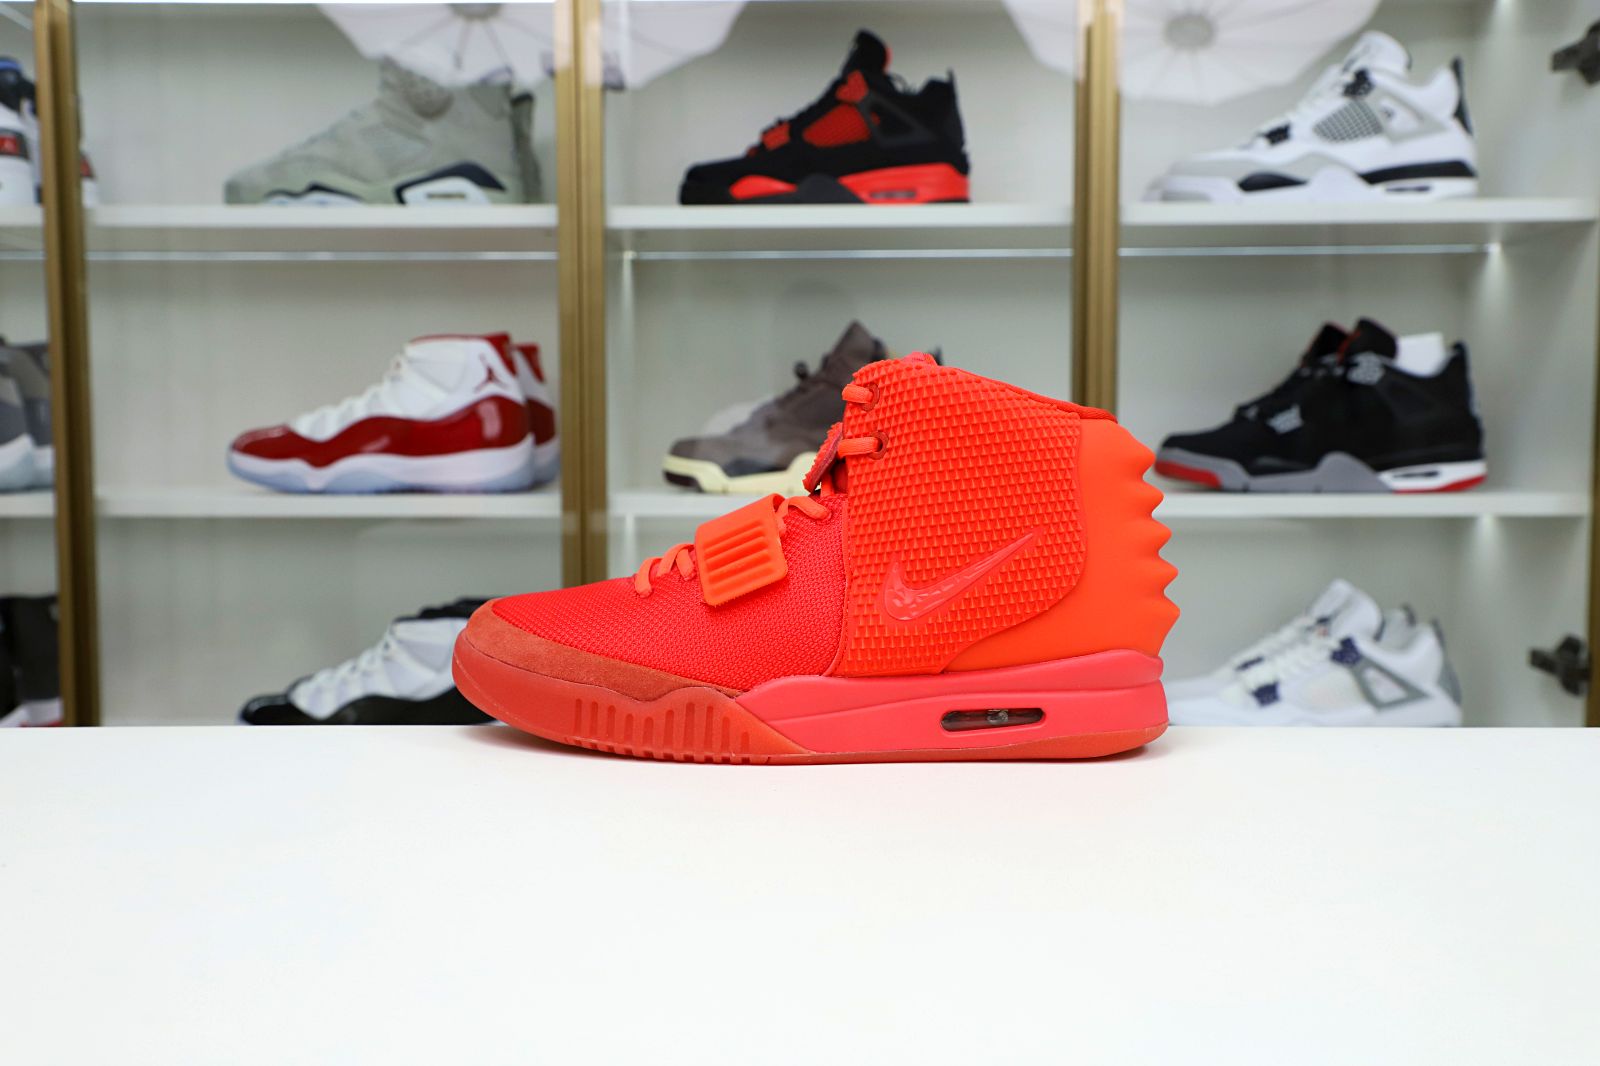 Nike Air Yeezy 2 red october